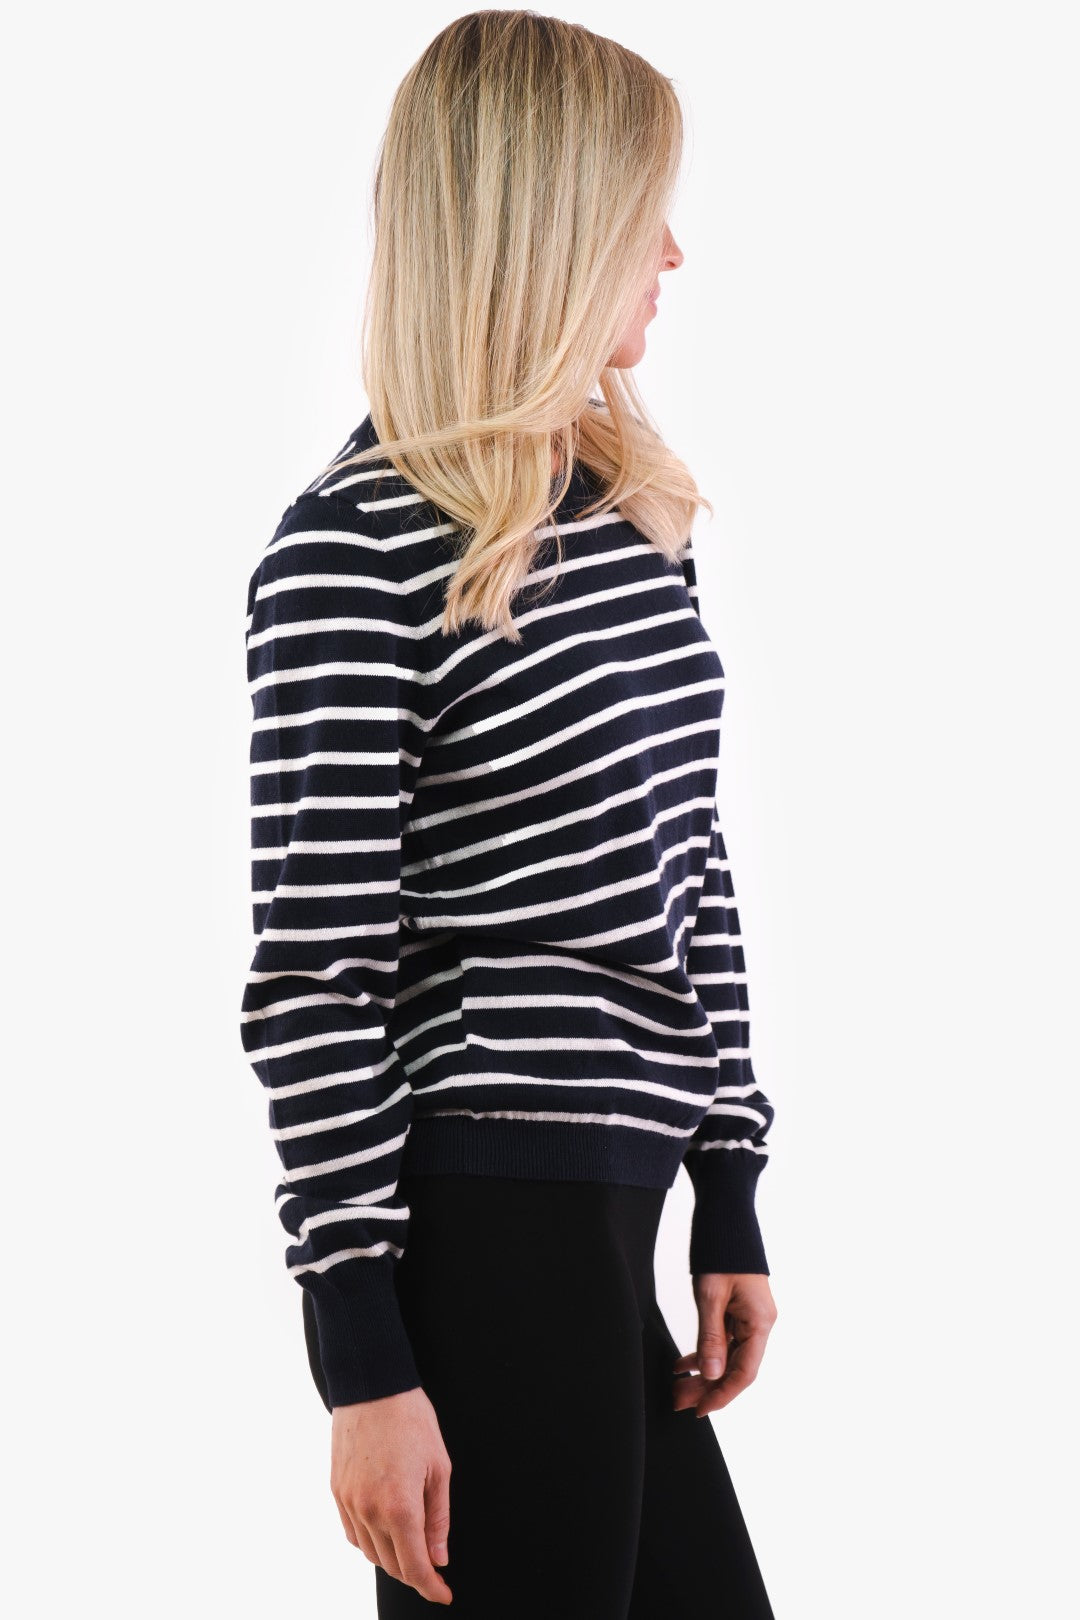 Gertie Part Two Lined Sweater in Navy color F.